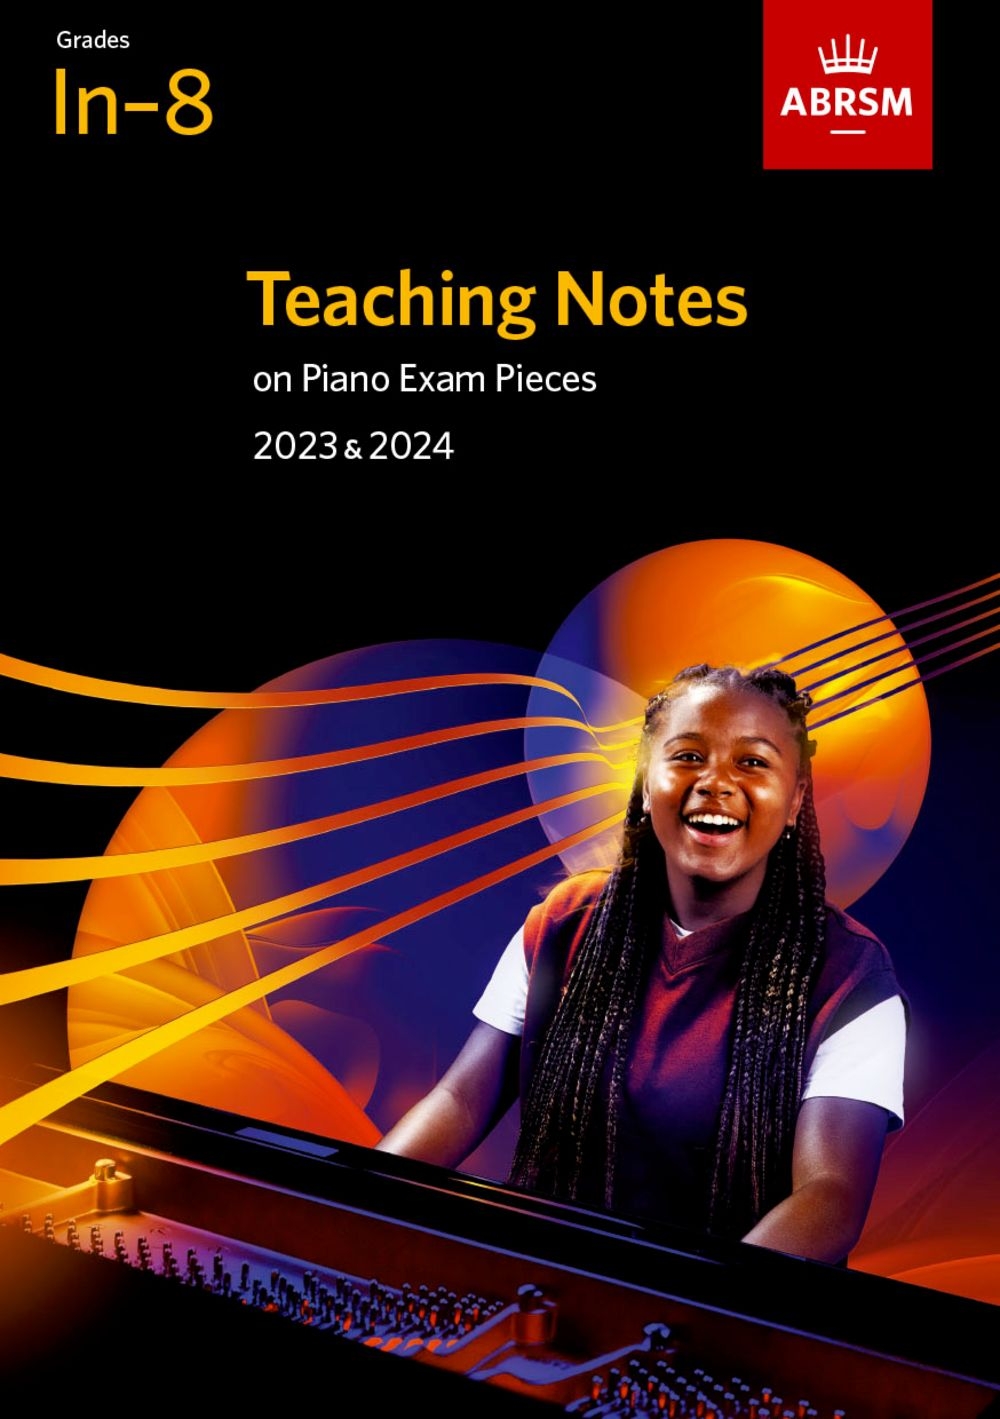 Teaching Notes on Piano Exam Pieces 2023 and 2024